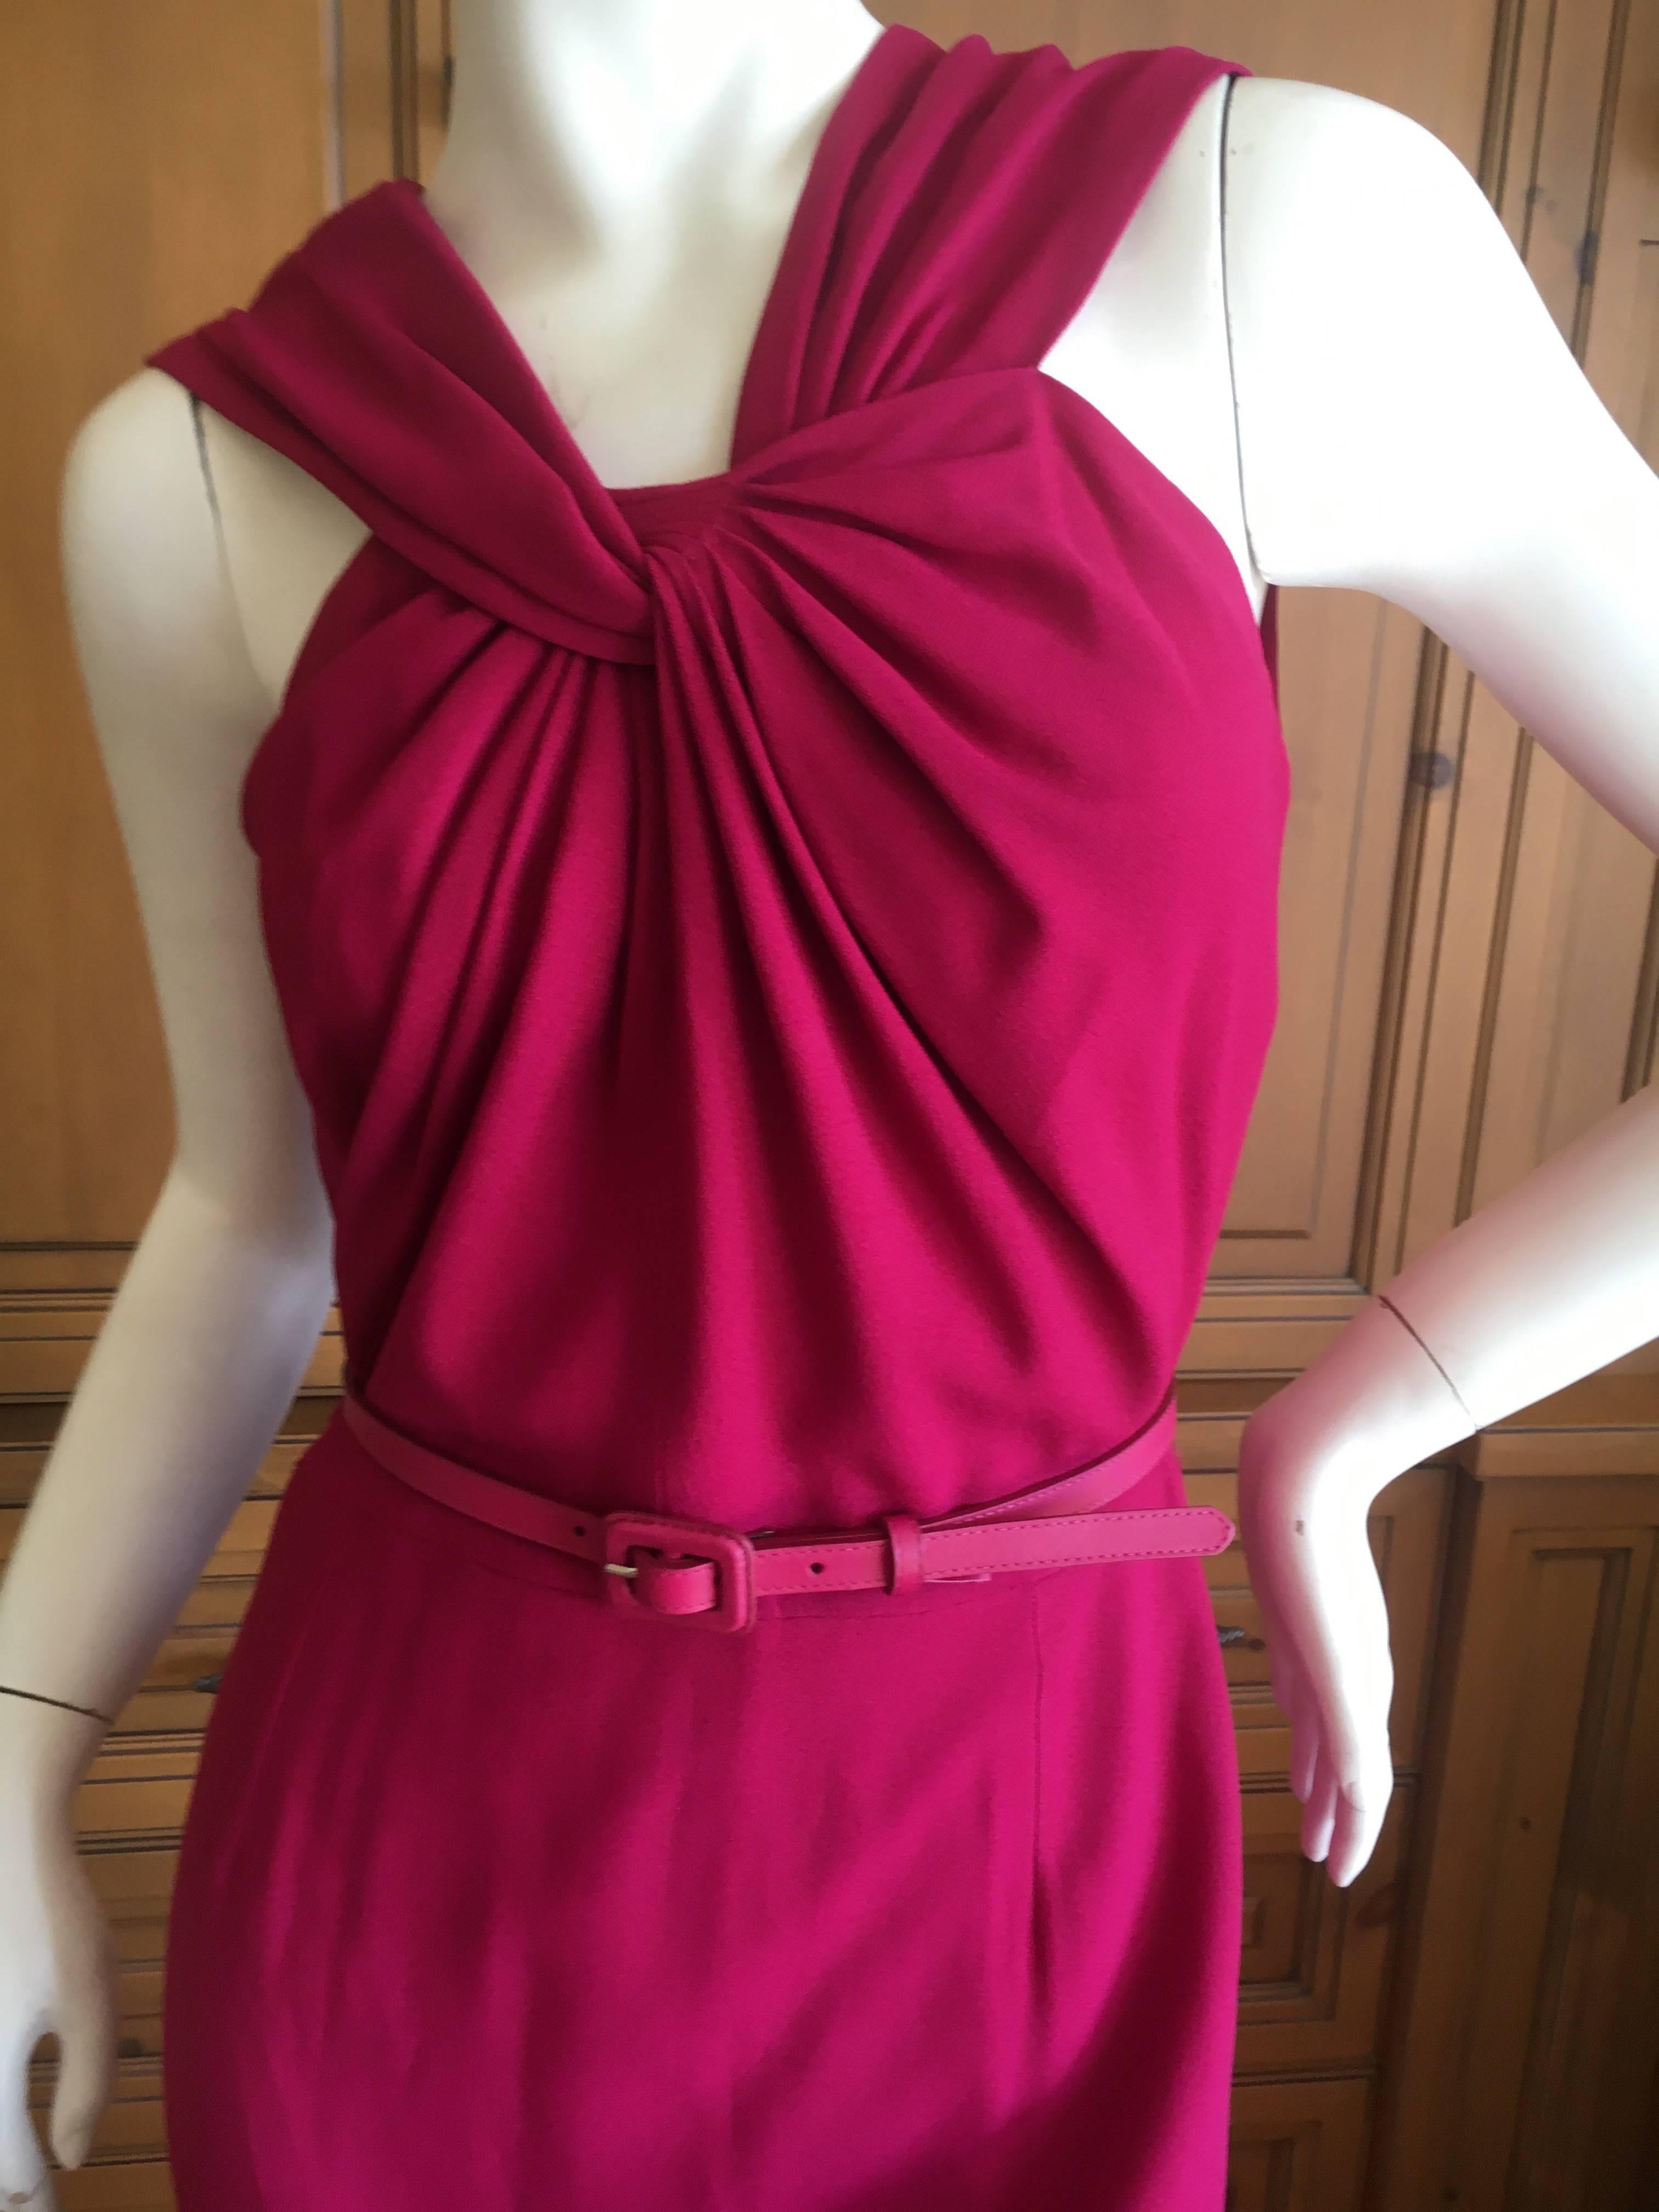 Christian Dior by John Galliano Fuscia Belted Day Dress.
Lined in silk with a detachable leather belt.
Size 36
Bust 36"
Waist 24"
Hips 40"
Length 36"
Excellent condition